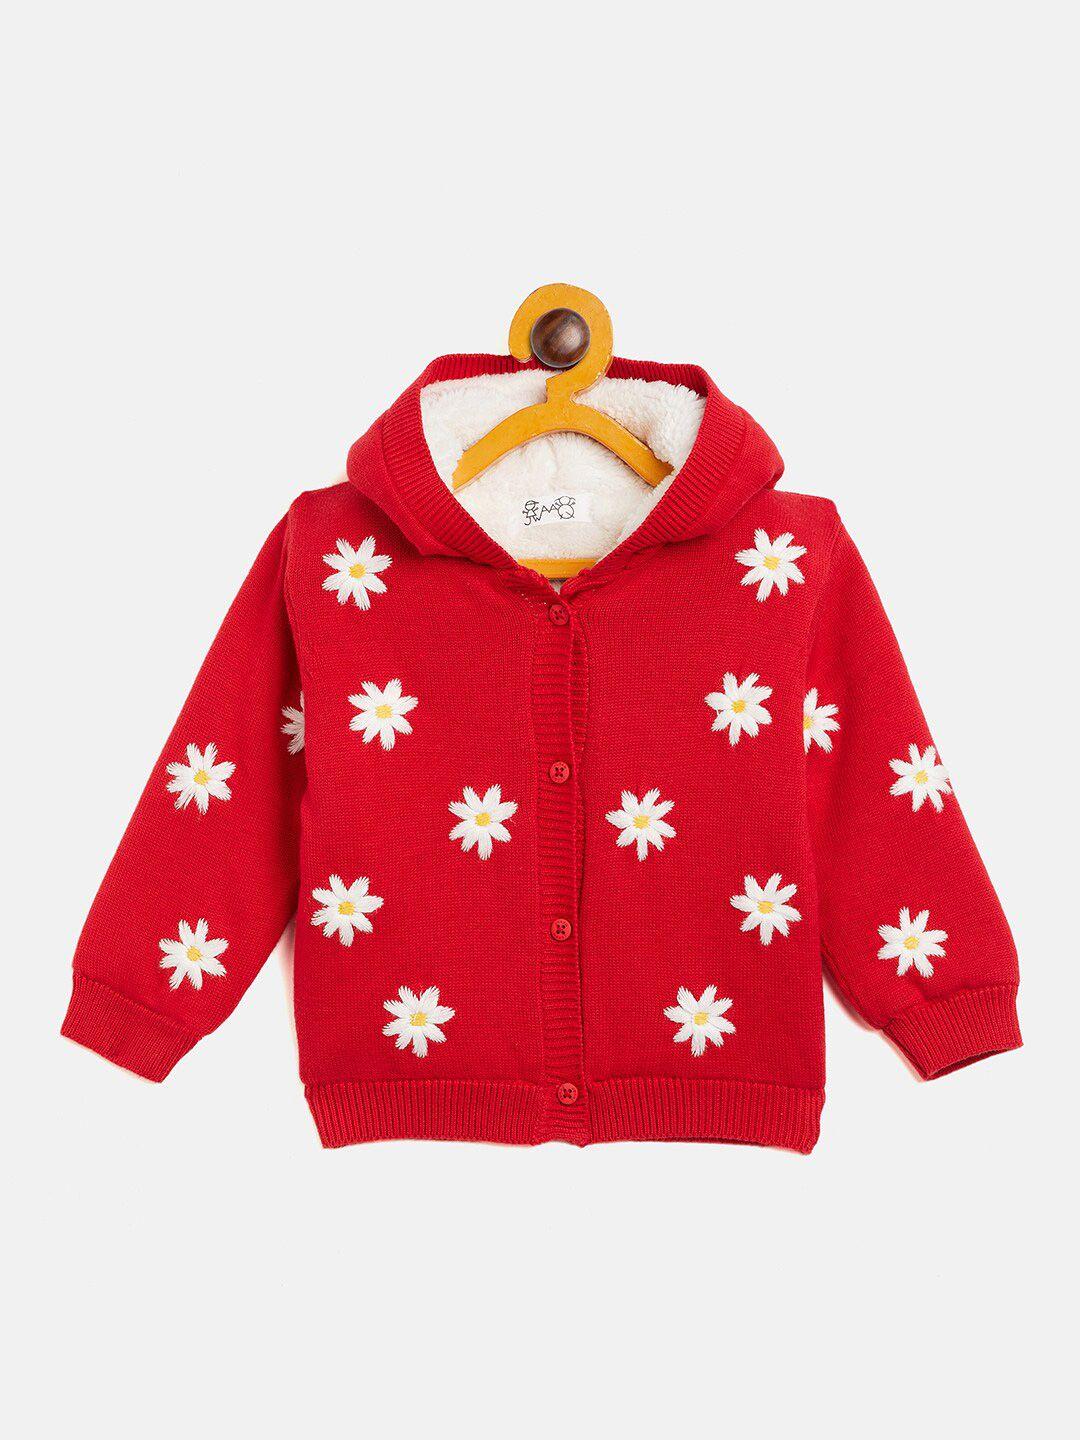 jwaaq kids floral embroidered long sleeves pure cotton hood cardigan sweater